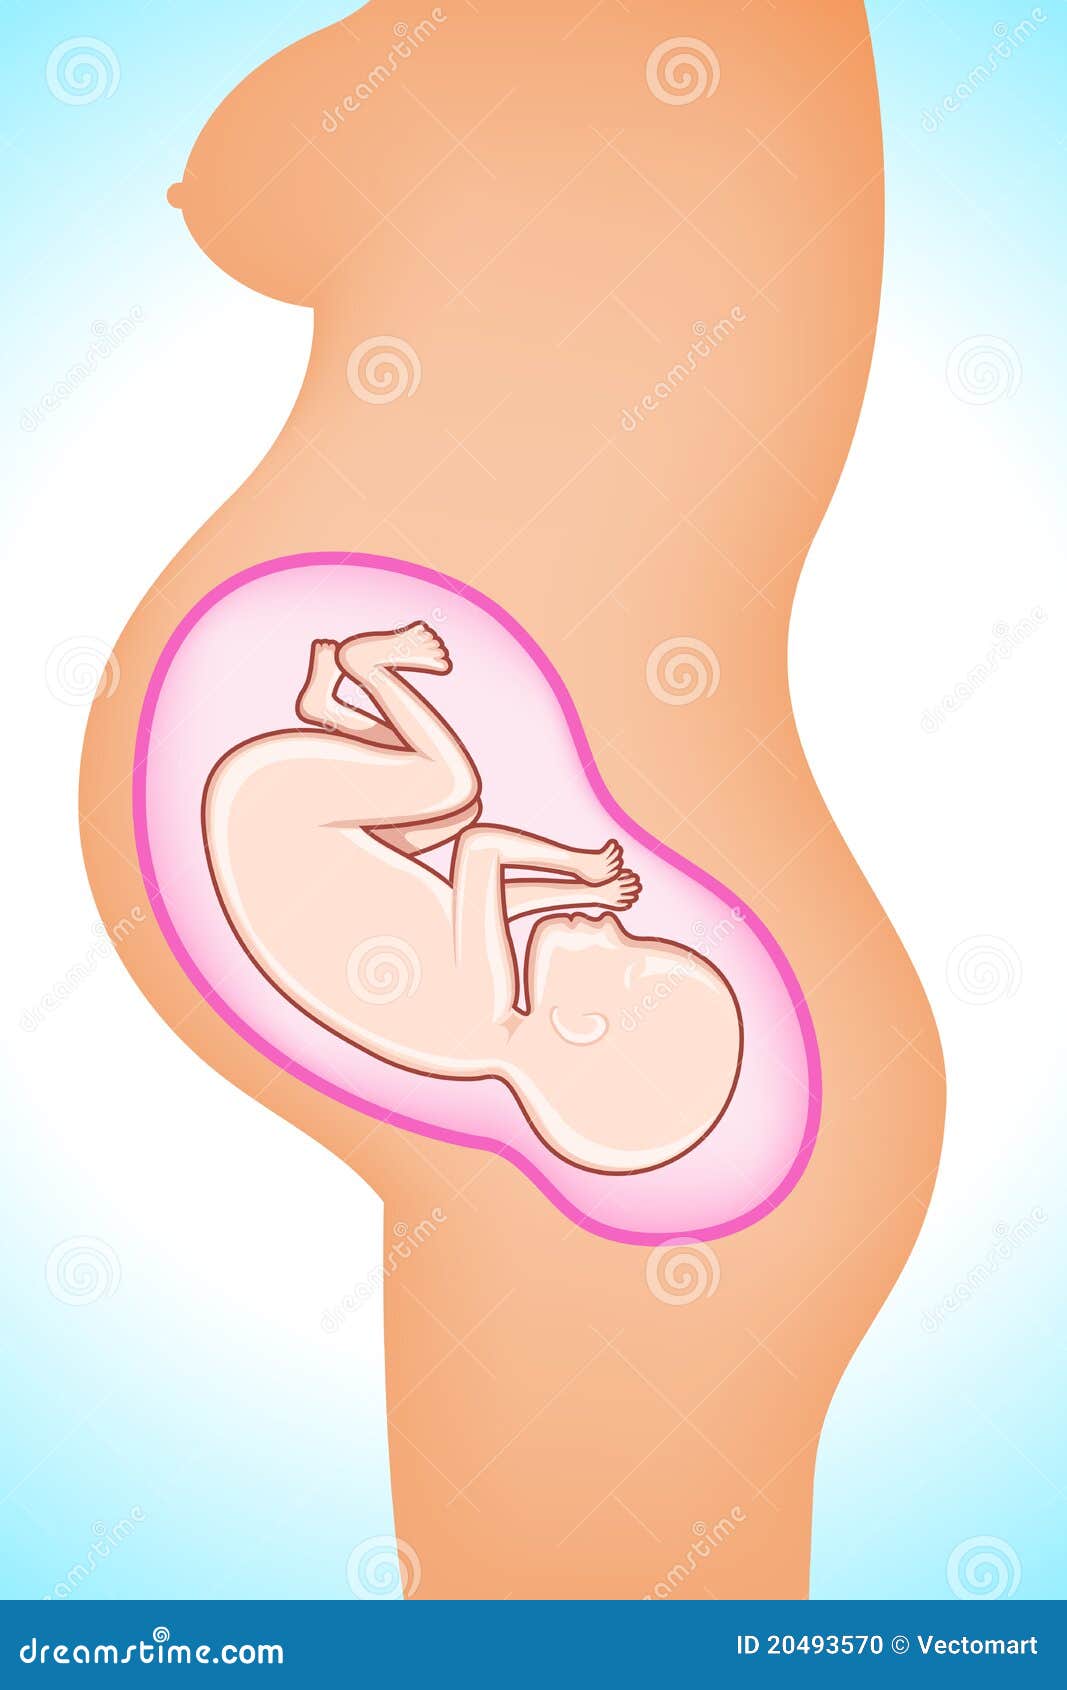 free clipart baby in womb - photo #21